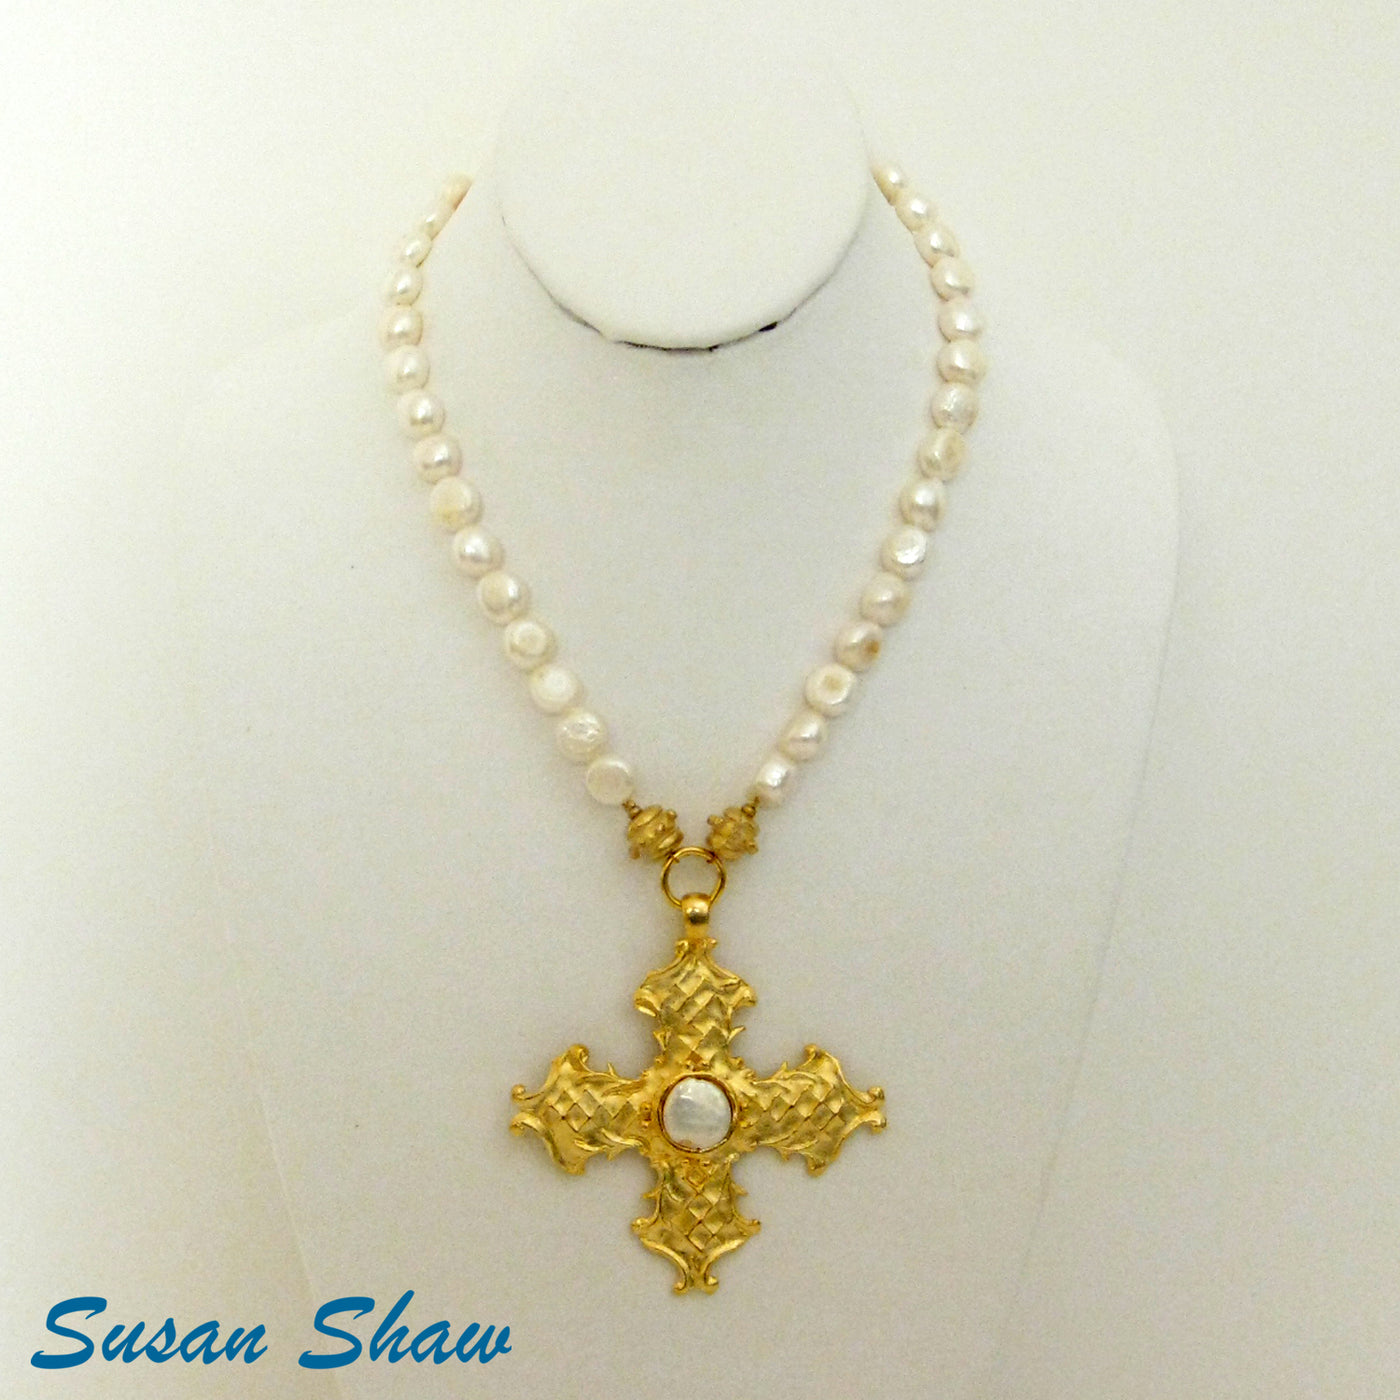 Handcast Gold Cross on Genuine Freshwater Pearl Strand Necklace